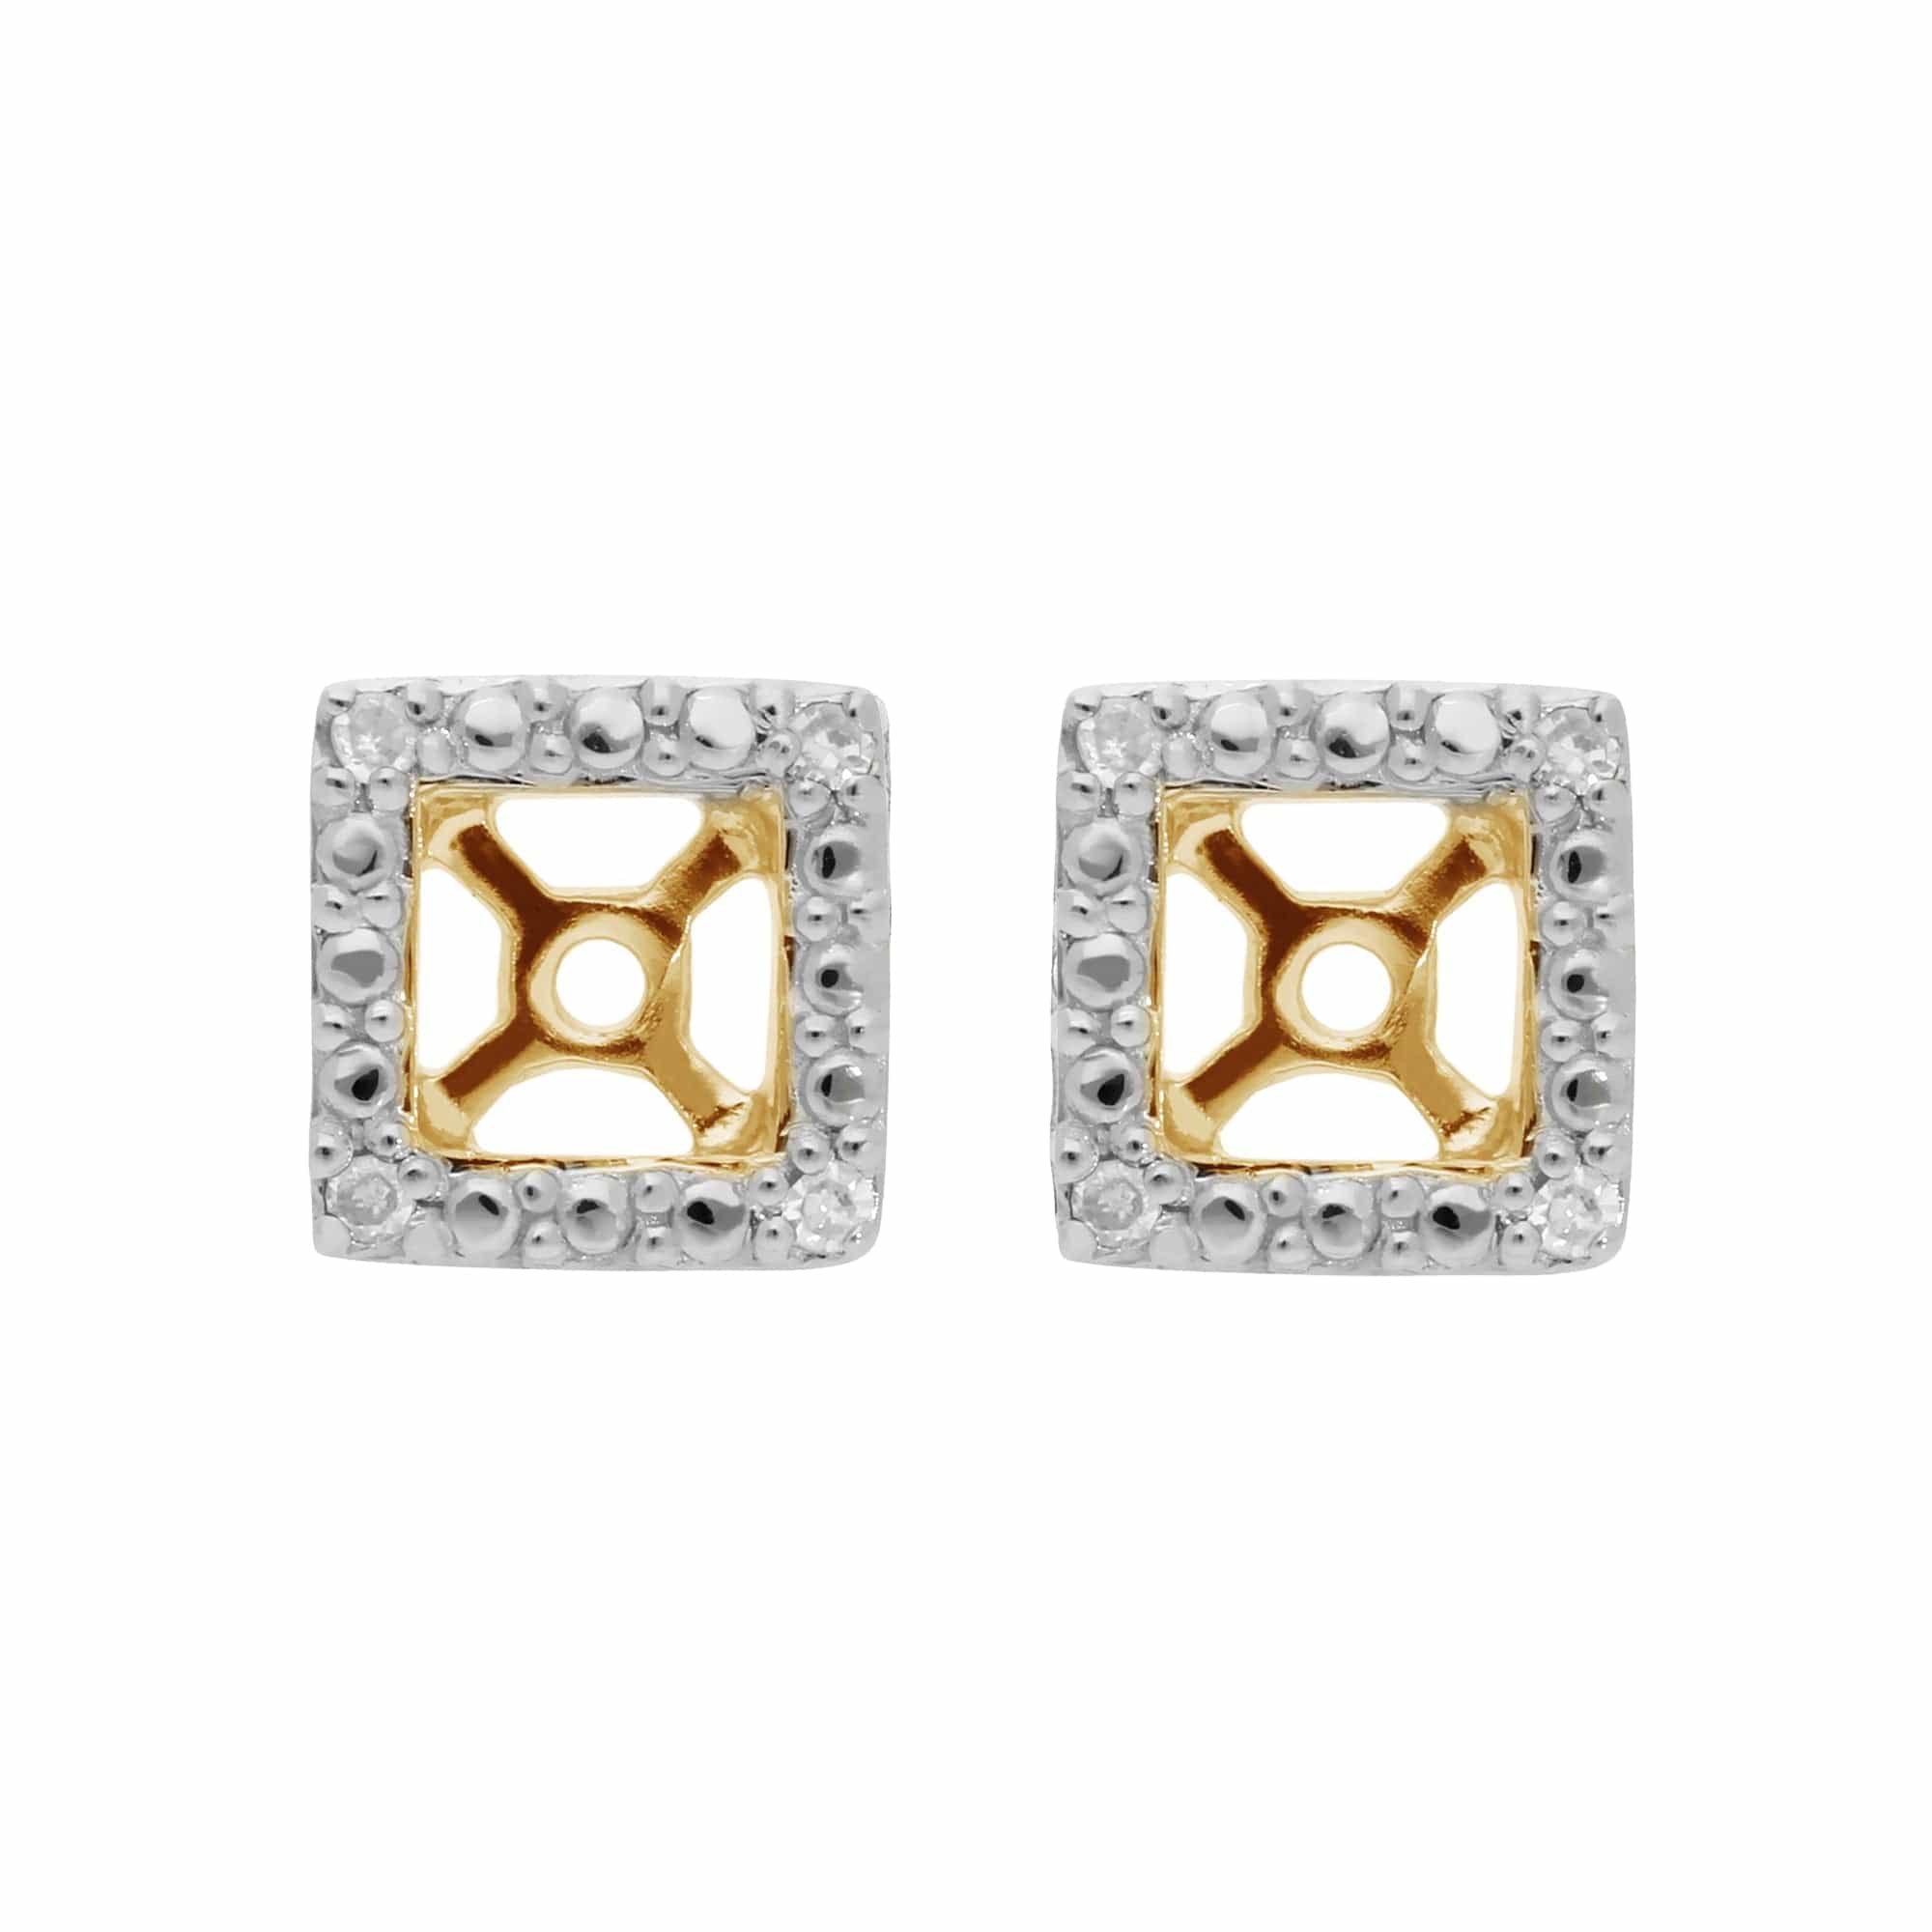 Classic Round Dark Blue Sapphire Stud Earrings with Detachable Diamond Square Earrings Jacket Set in 9ct Yellow Gold - Gemondo